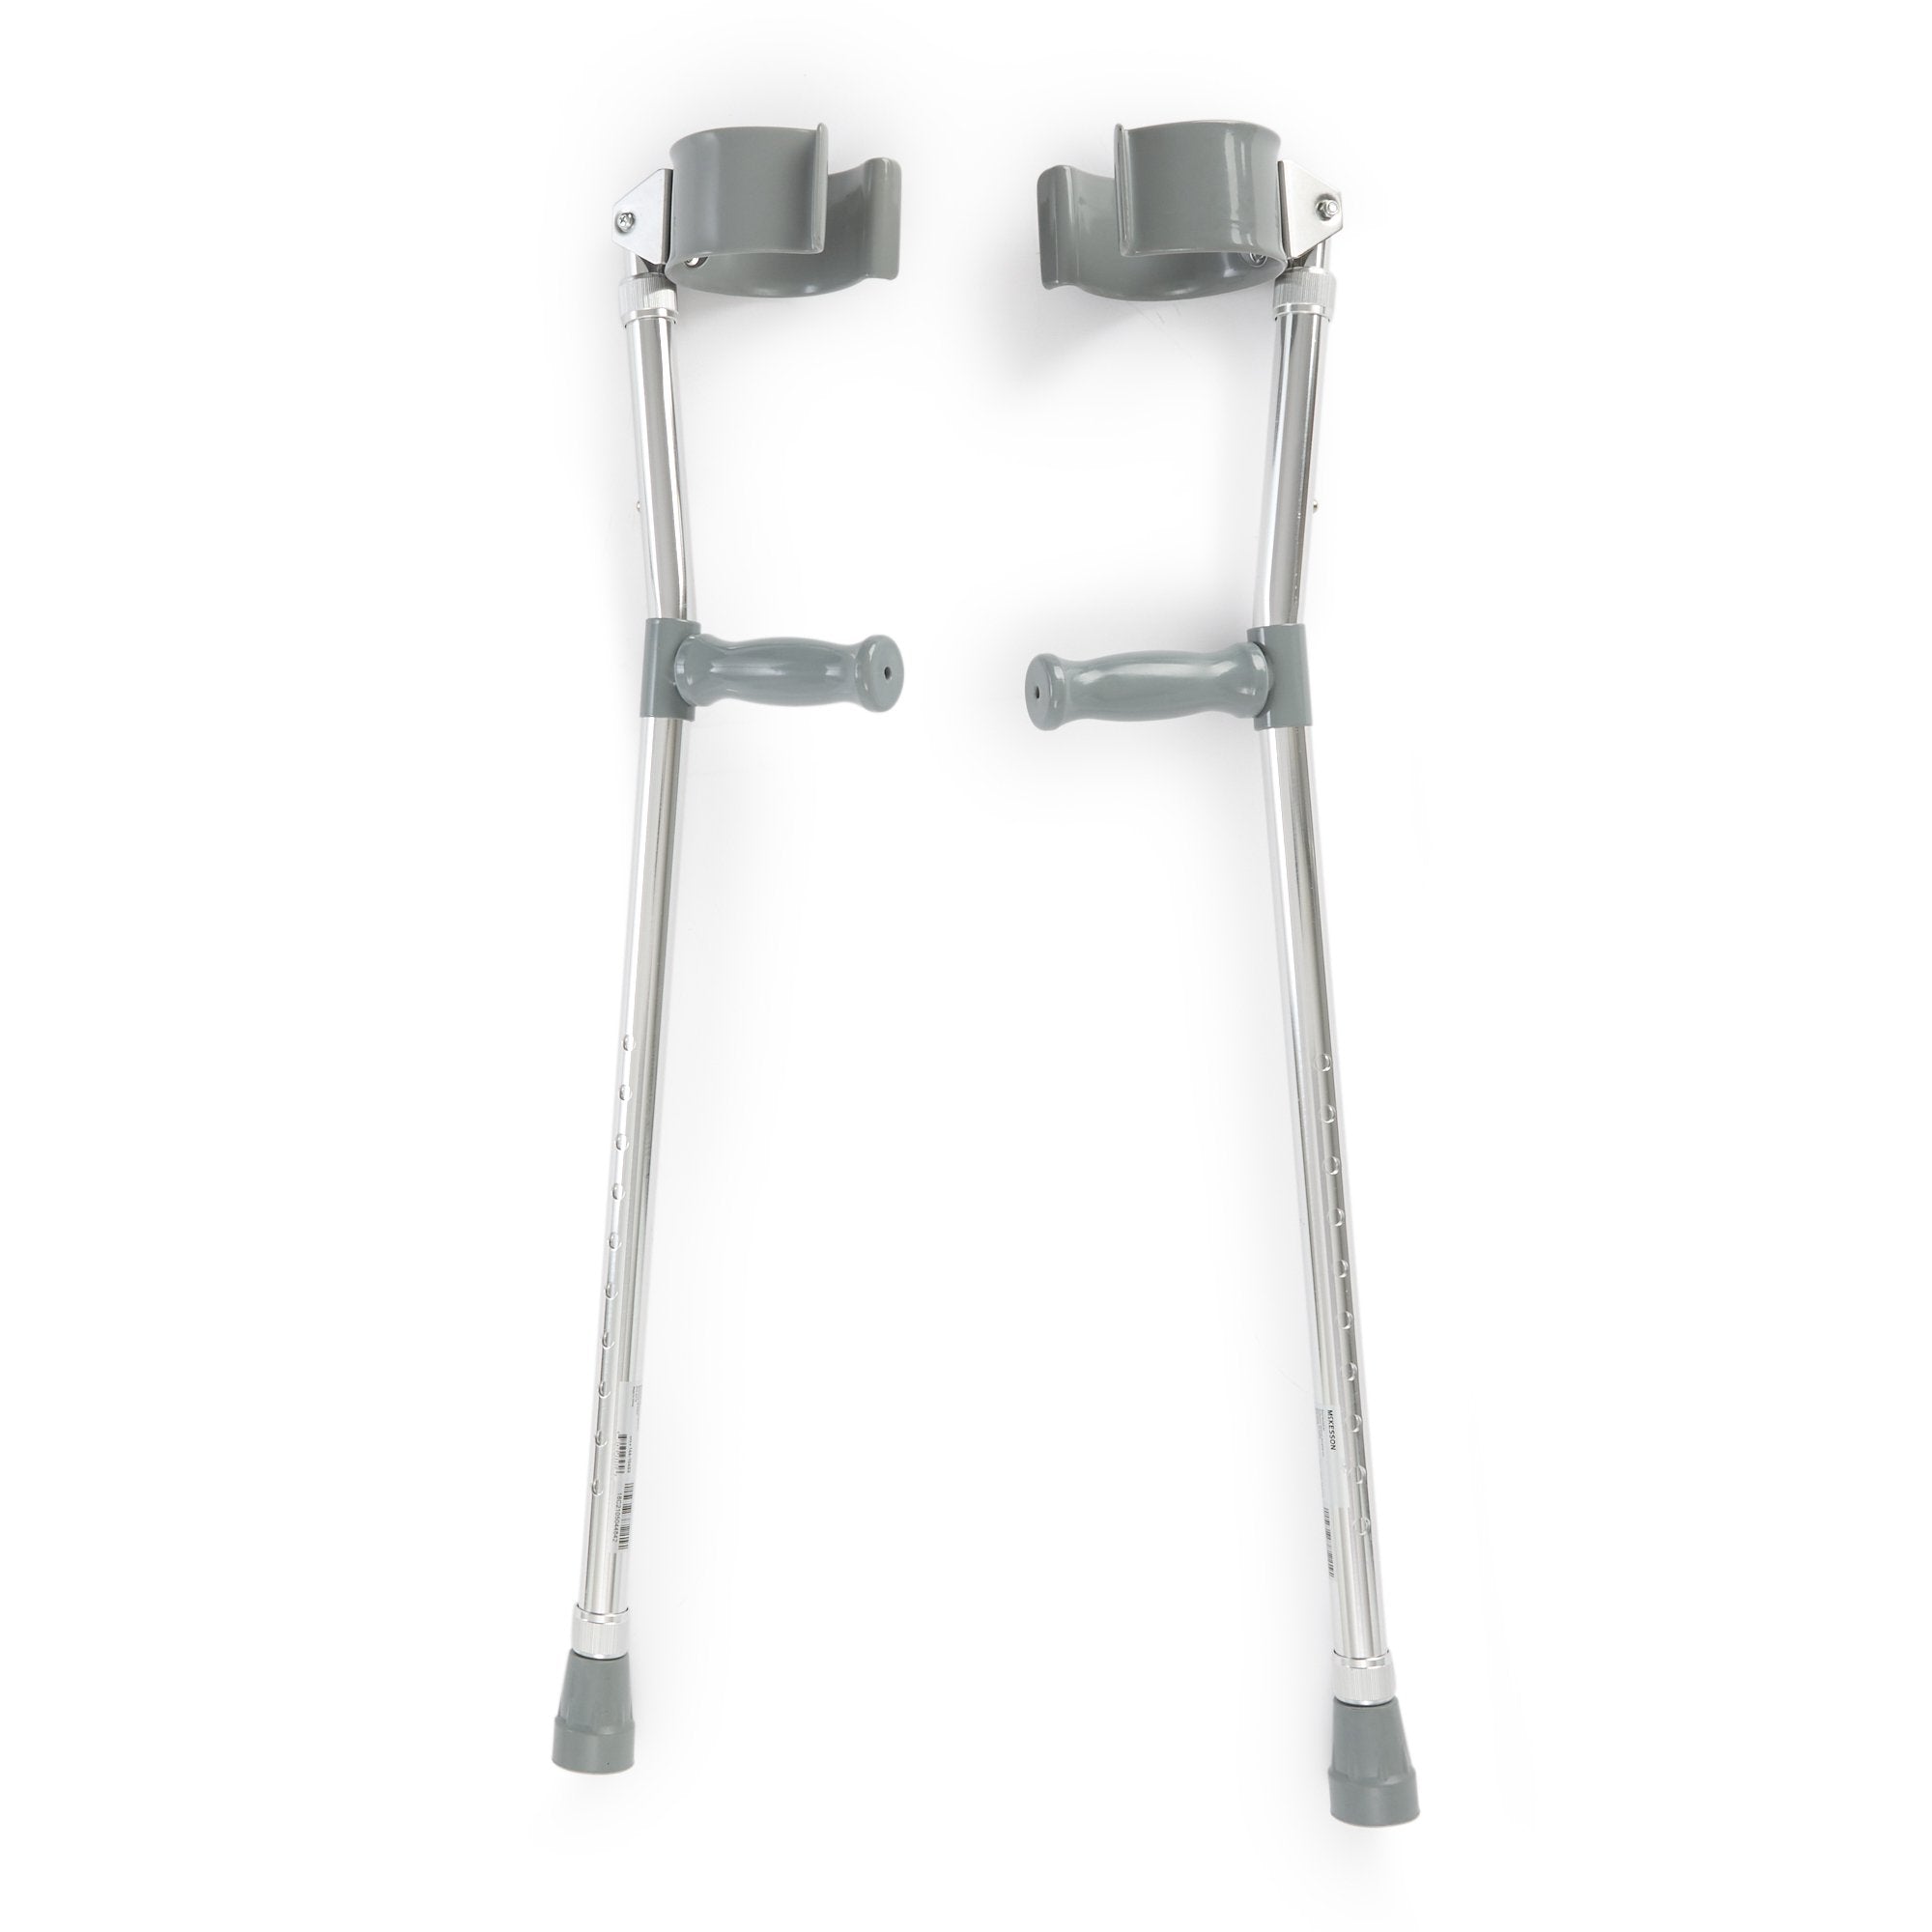 Forearm Crutches Mckesson Adult Steel Frame 300 lbs. Weight Capacity